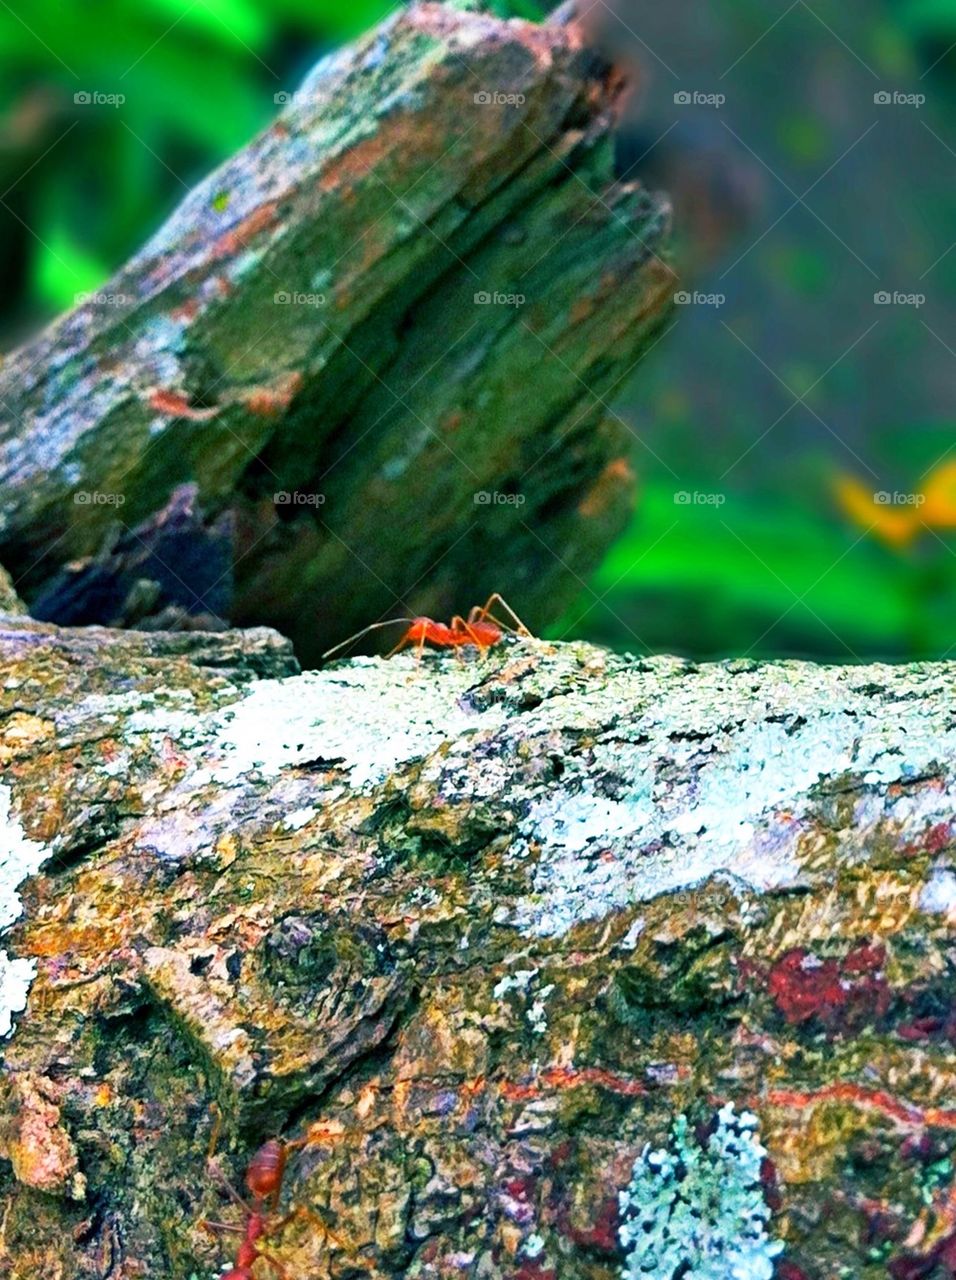 Ant Crossing the log